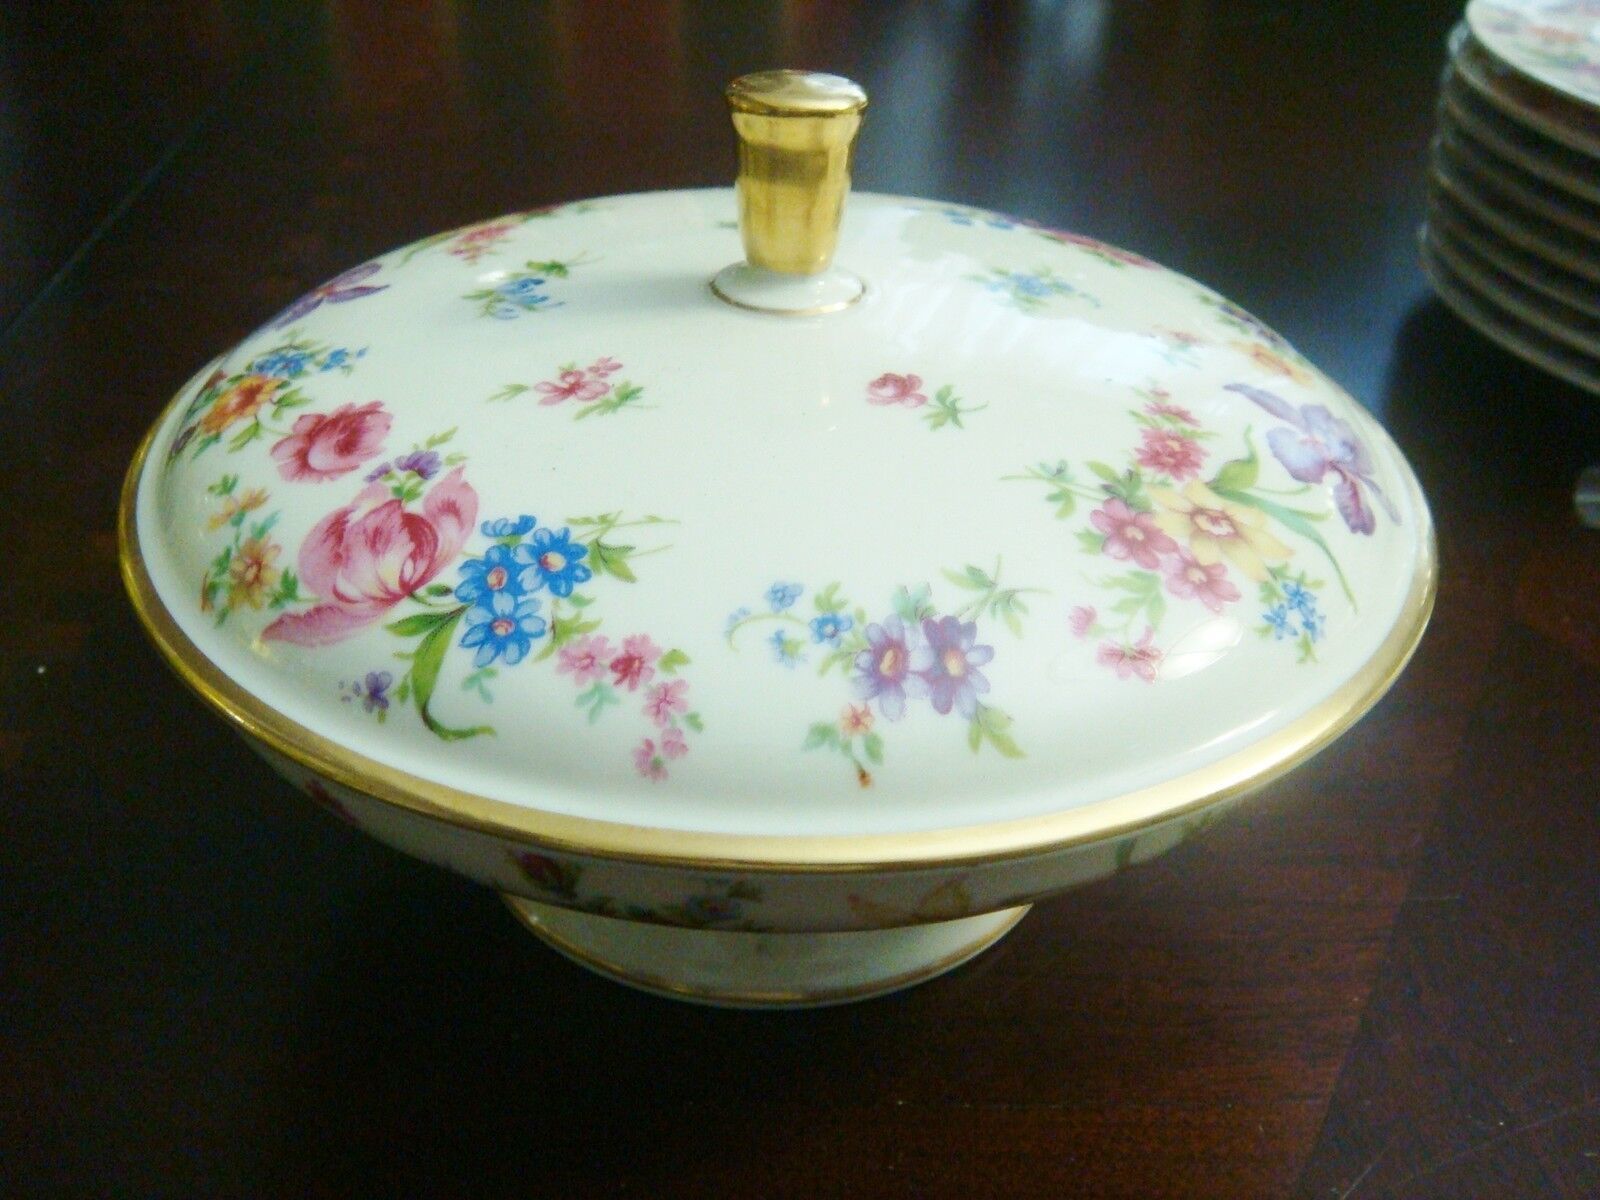 FRITZ THOMAS PORCELAIN- ROSENTHAL (Germany- 1950s covered bowl, 4 1/2" tall[*76] - $94.05